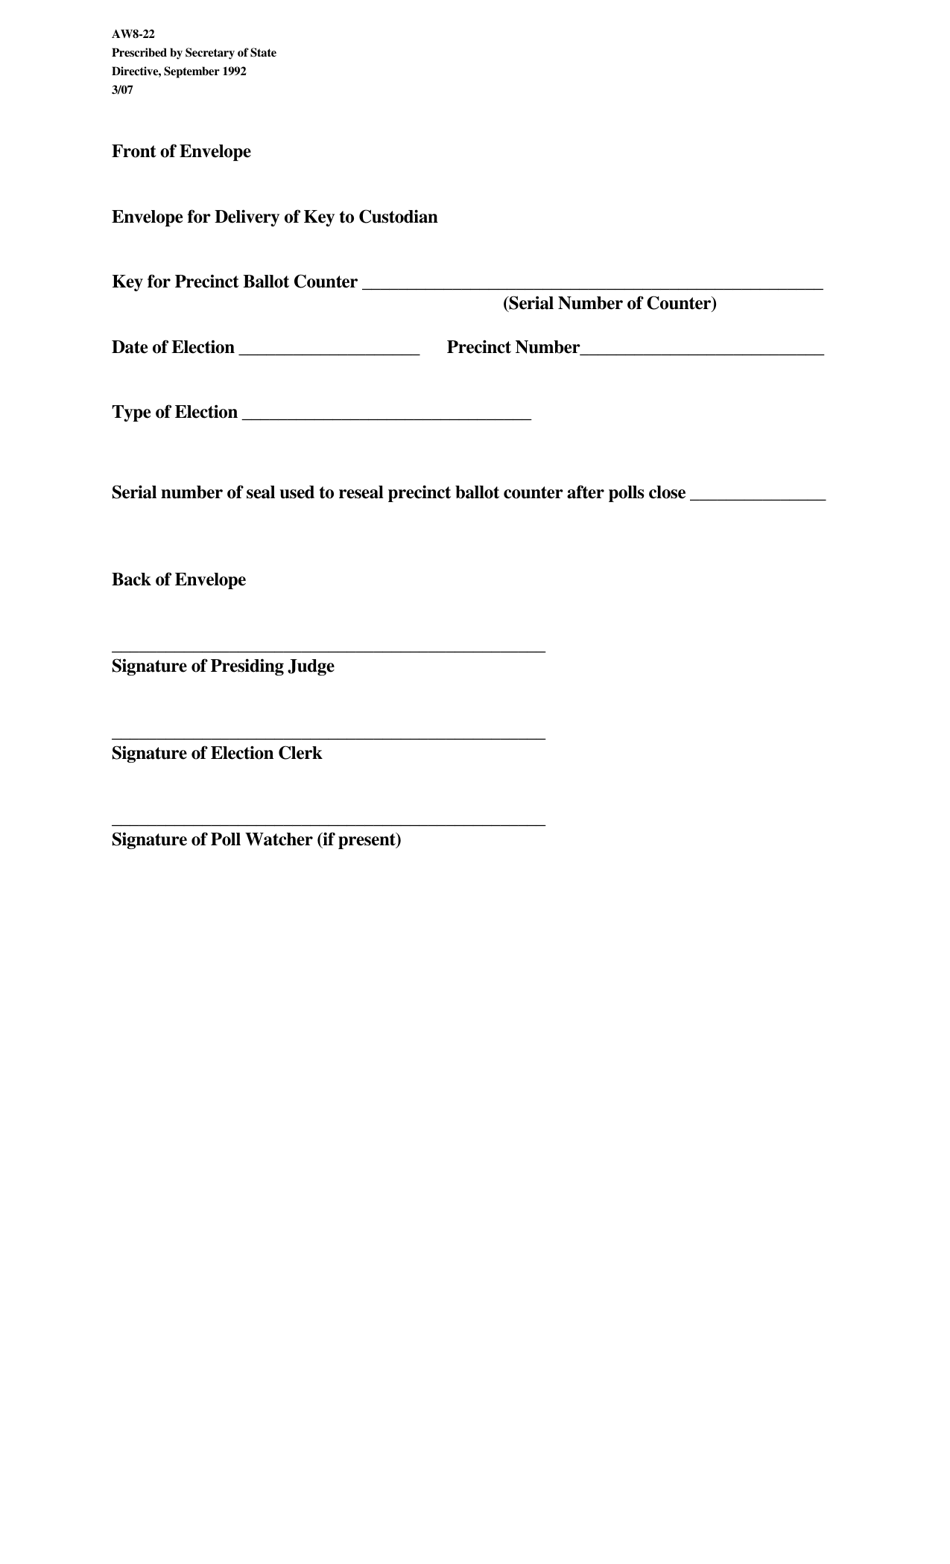 Form AW8-22 Envelope for Delivery of Key to Custodian - Texas, Page 1